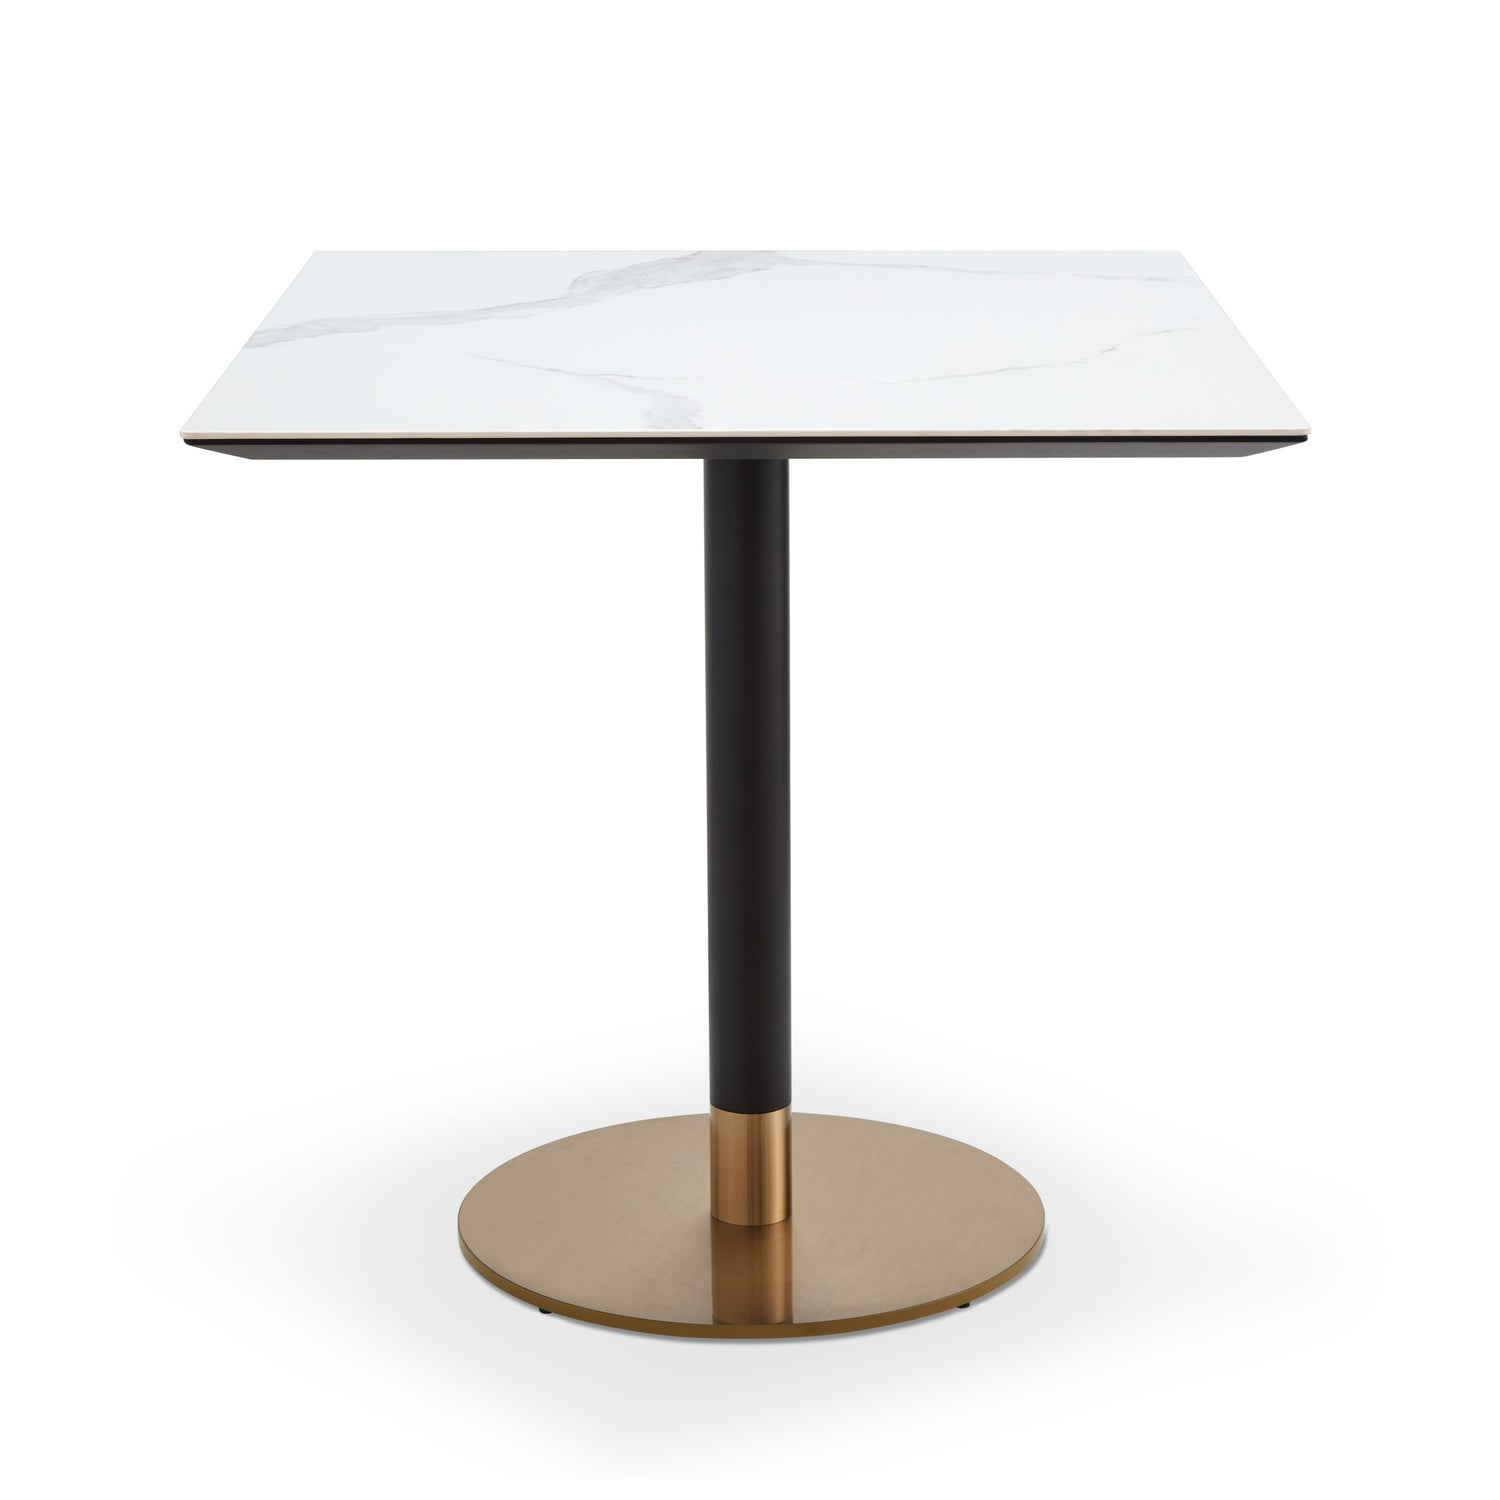  LiangAndEimil-Liang & Eimil Theodore Dining Table in White-White 445 